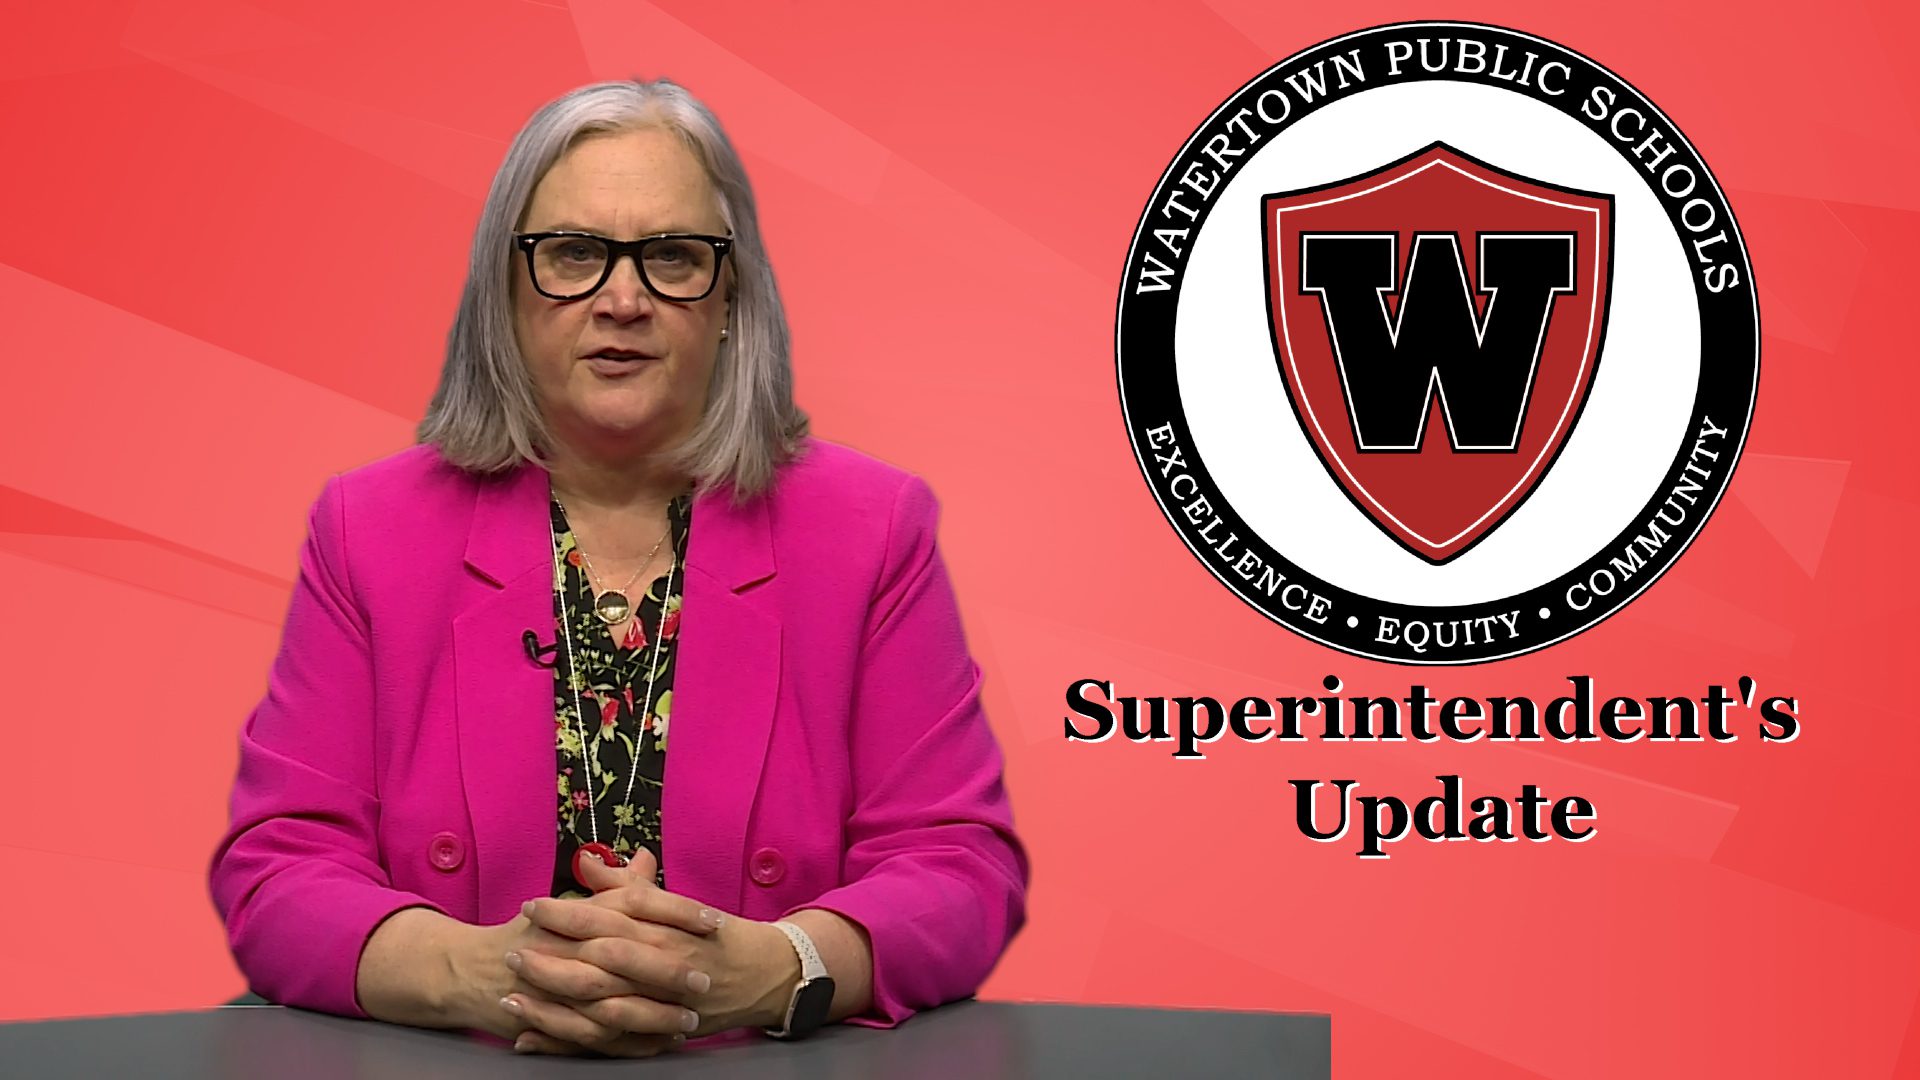 Superintendent Galdston Shares Updates on Universal Pre-K, New and Departing Staff at WPS, and Upcoming Music & Art Events